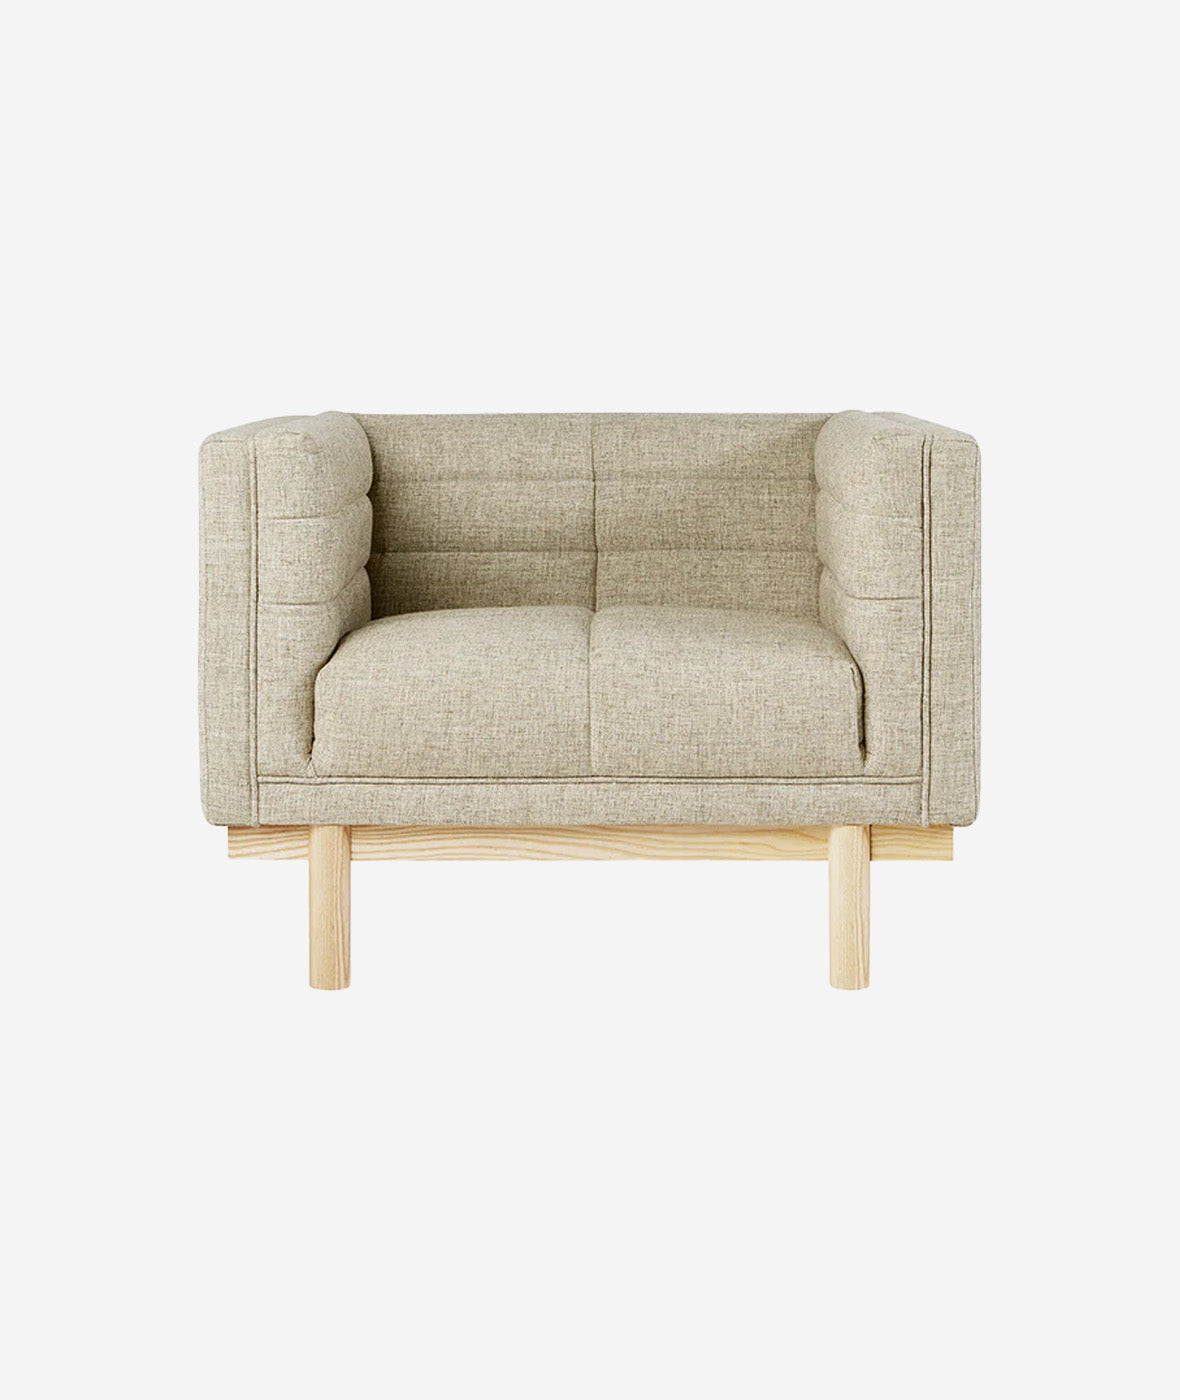 Mulholland Chair - More Options